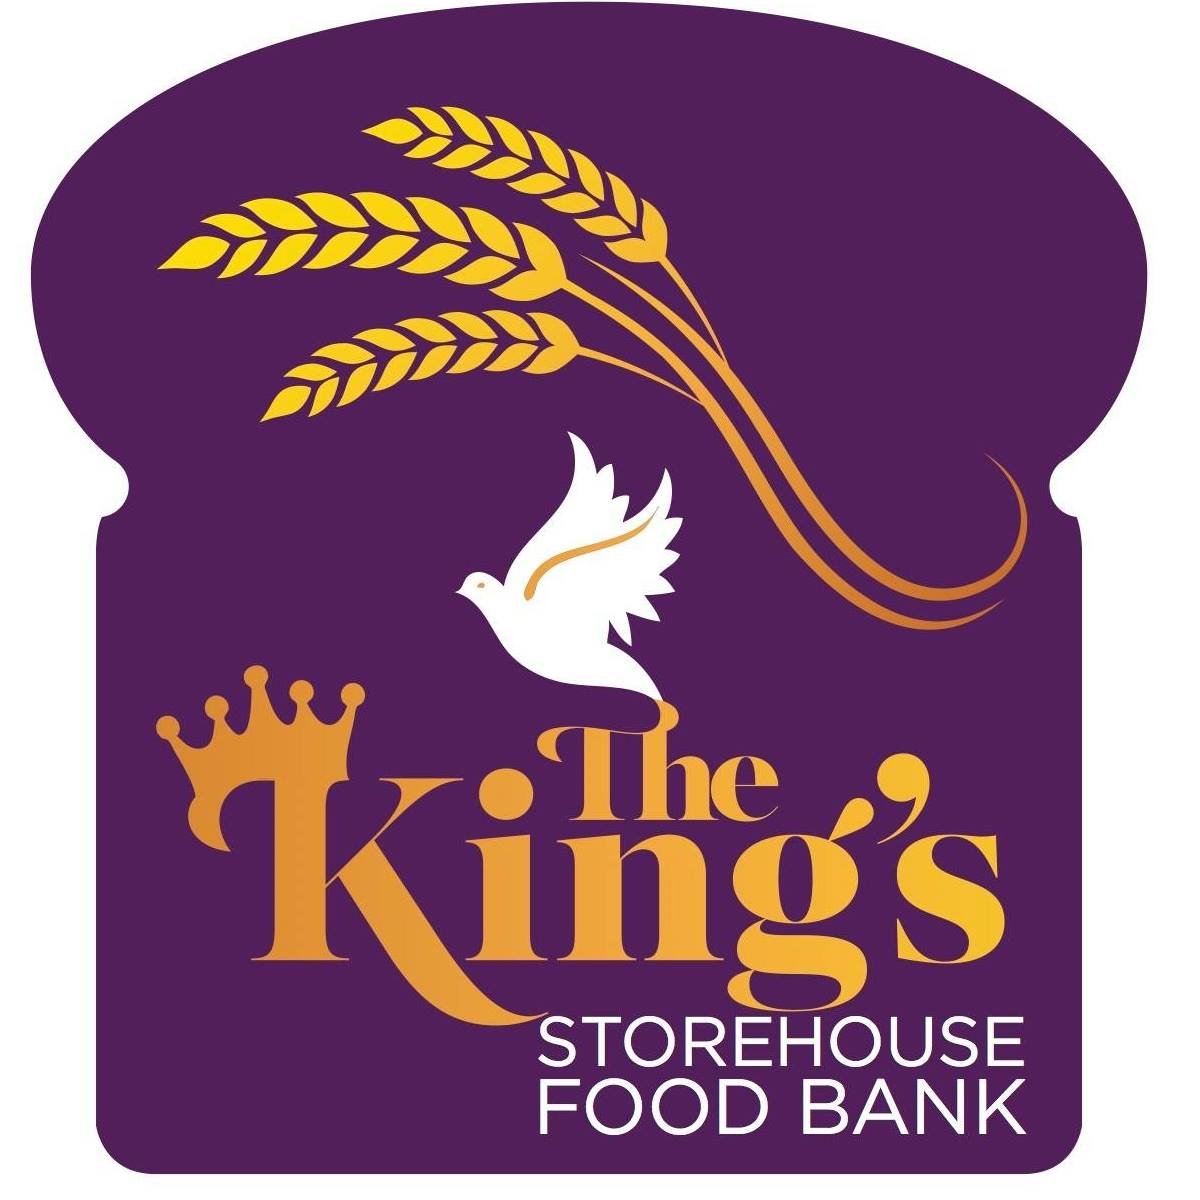 King's Storehouse Food Bank